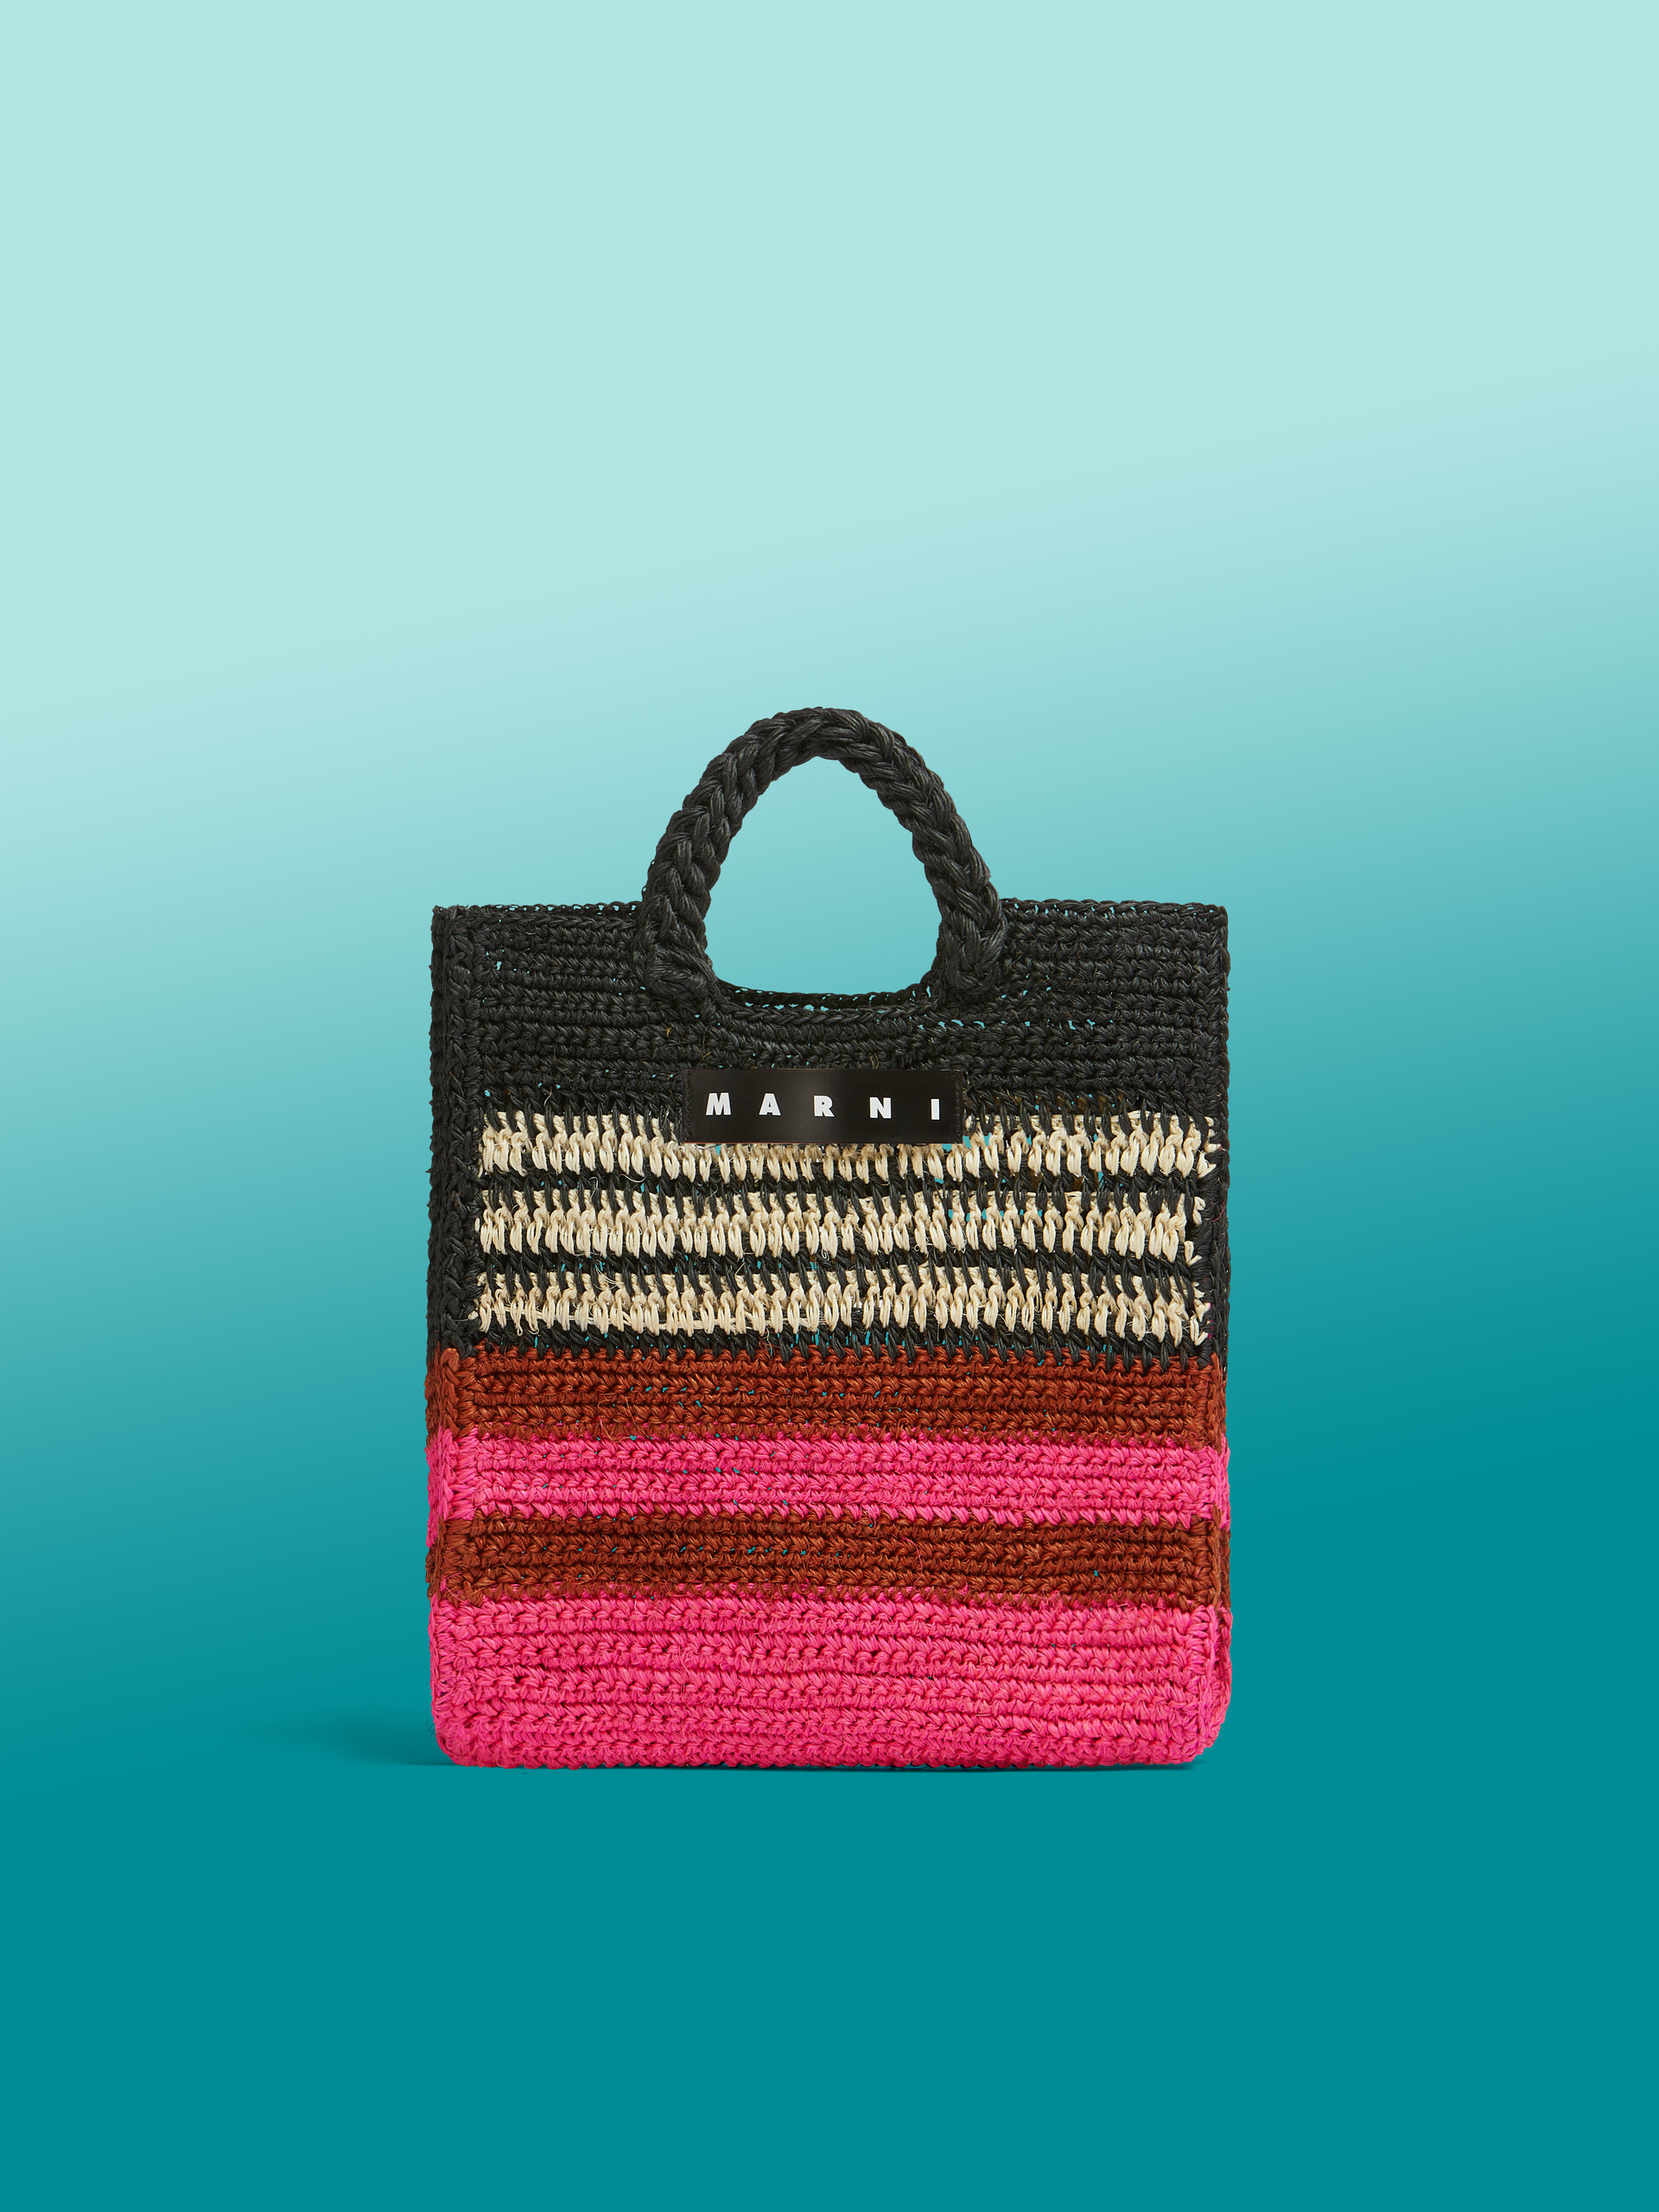 Brown striped MARNI MARKET FIQUE bag - Shopping Bags - Image 1